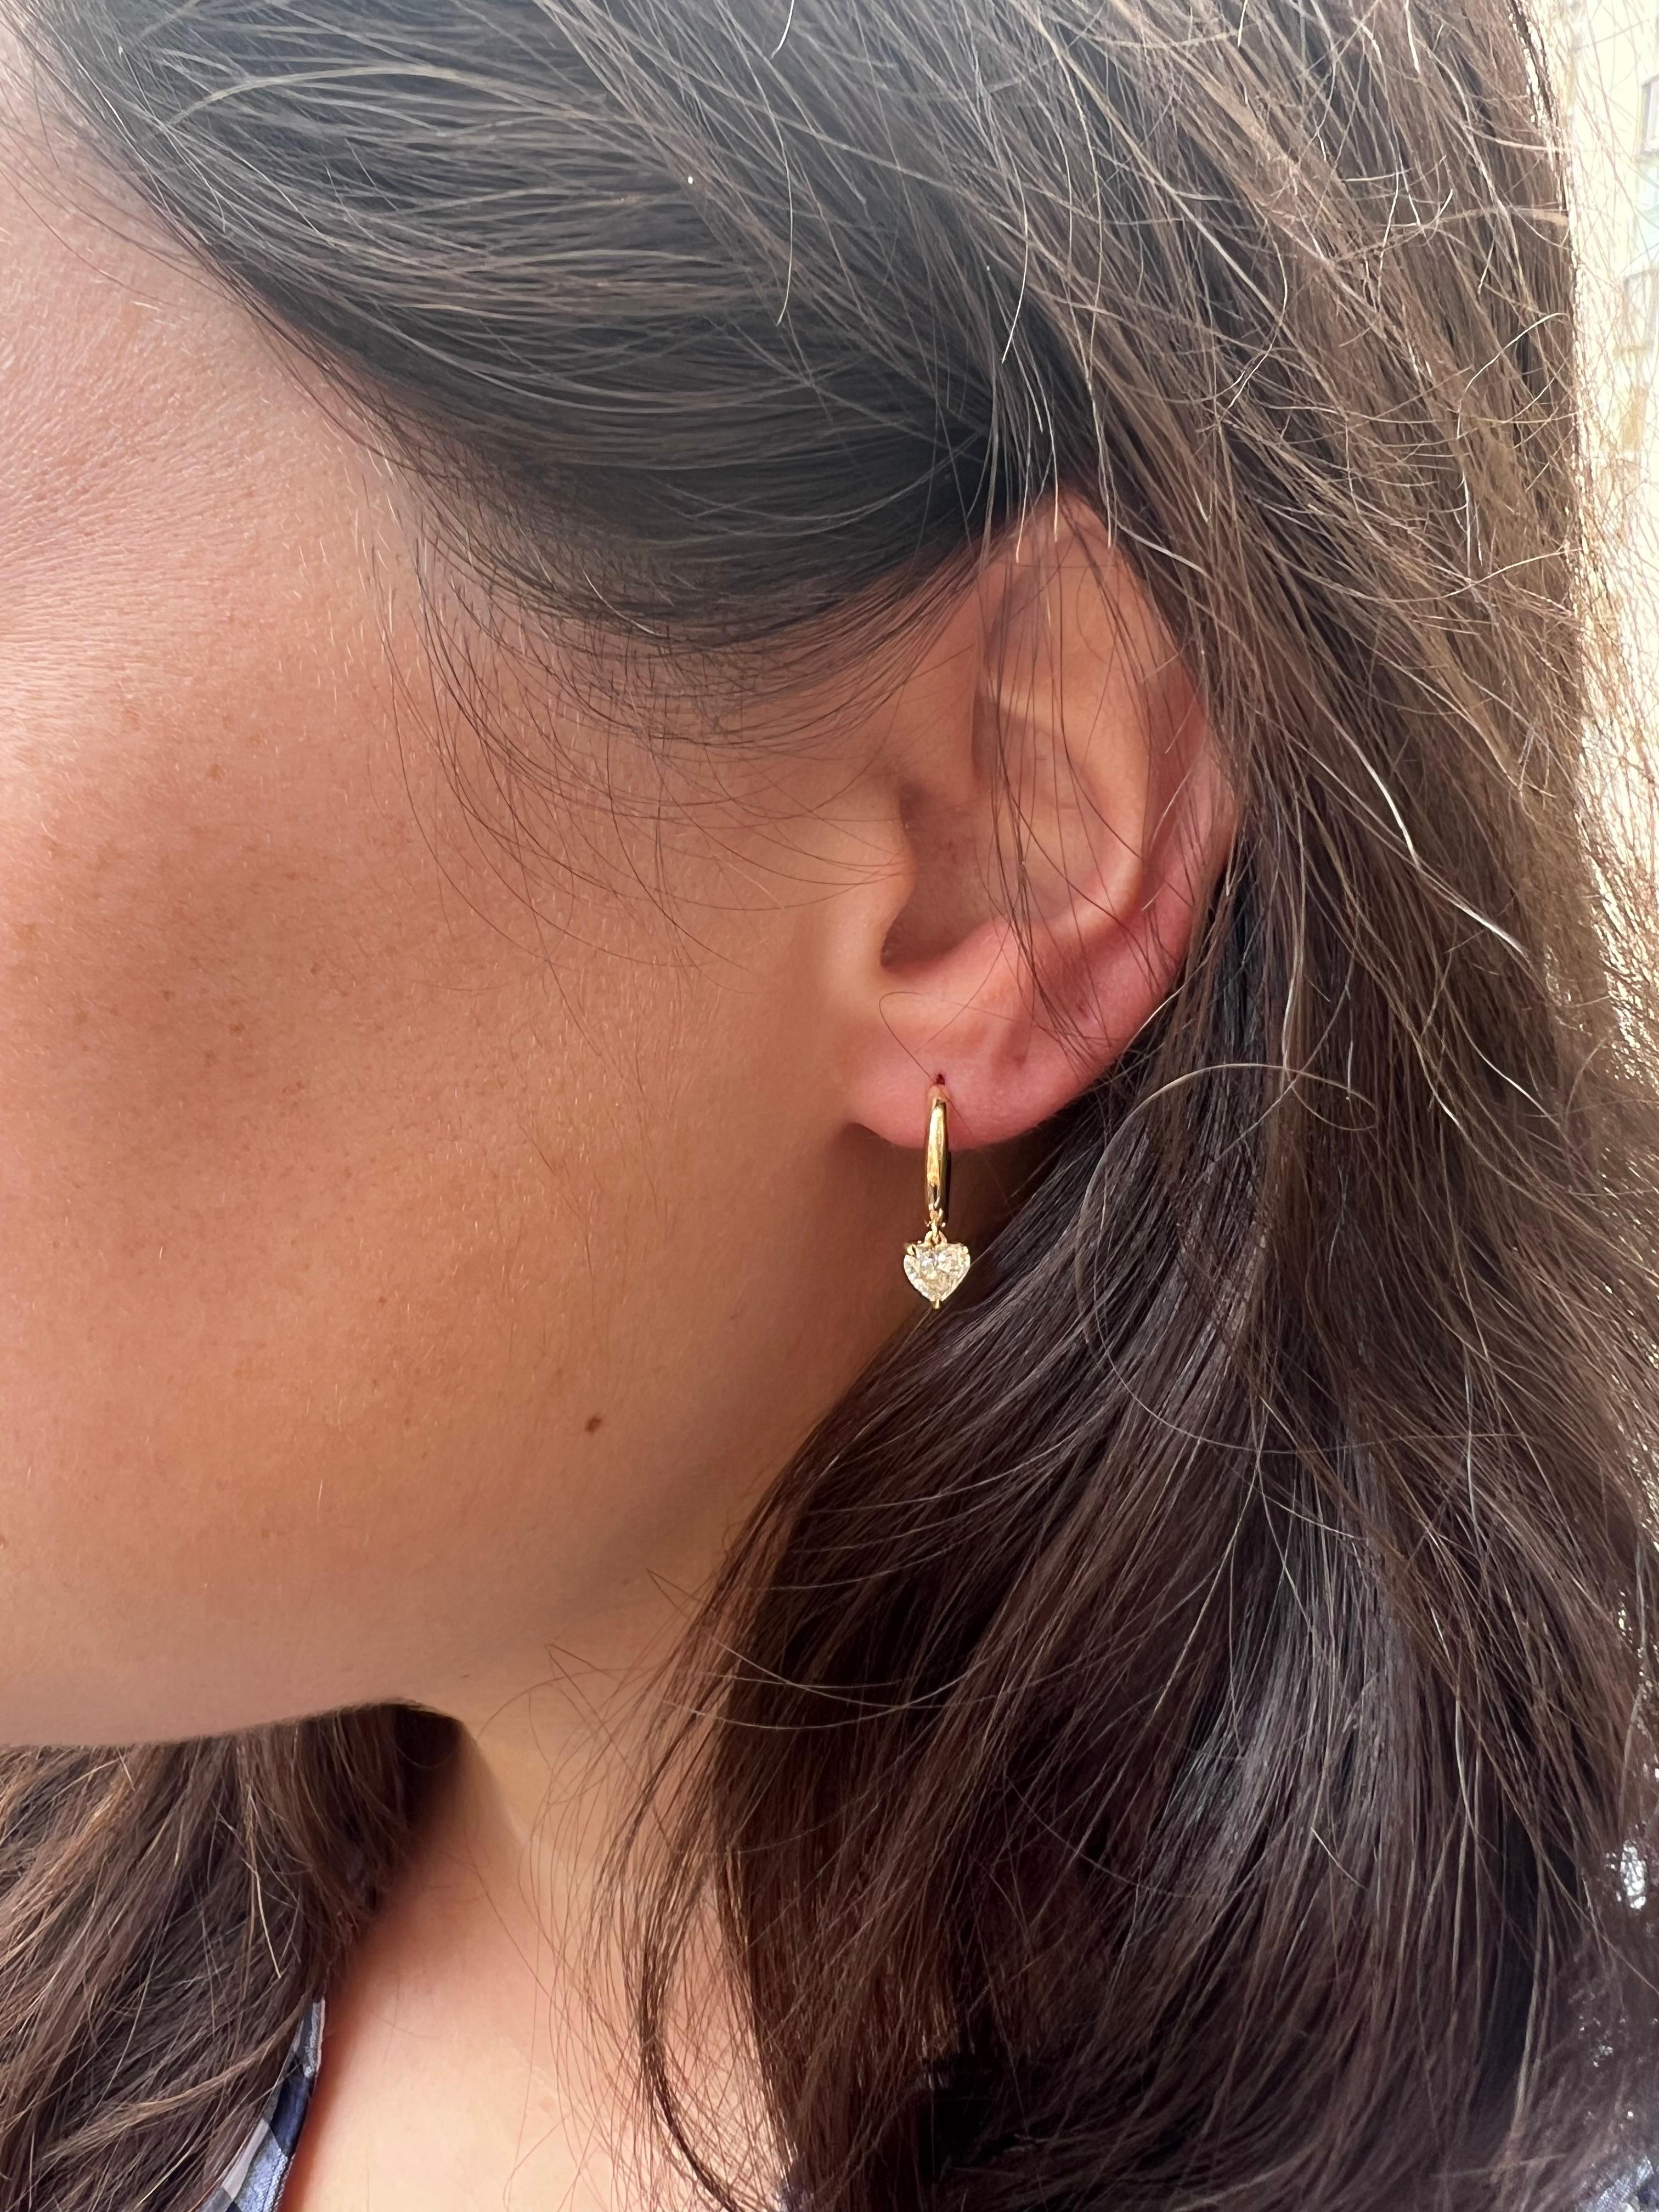 These charming earrings by J. Birnbach are perfect for everyday, worn on their own or part of an ear party! The tubular 18K yellow round round huggies are 1.25 centimeters. A 0.50 carat D color, SI1 clarity heart shape diamond dangles from each